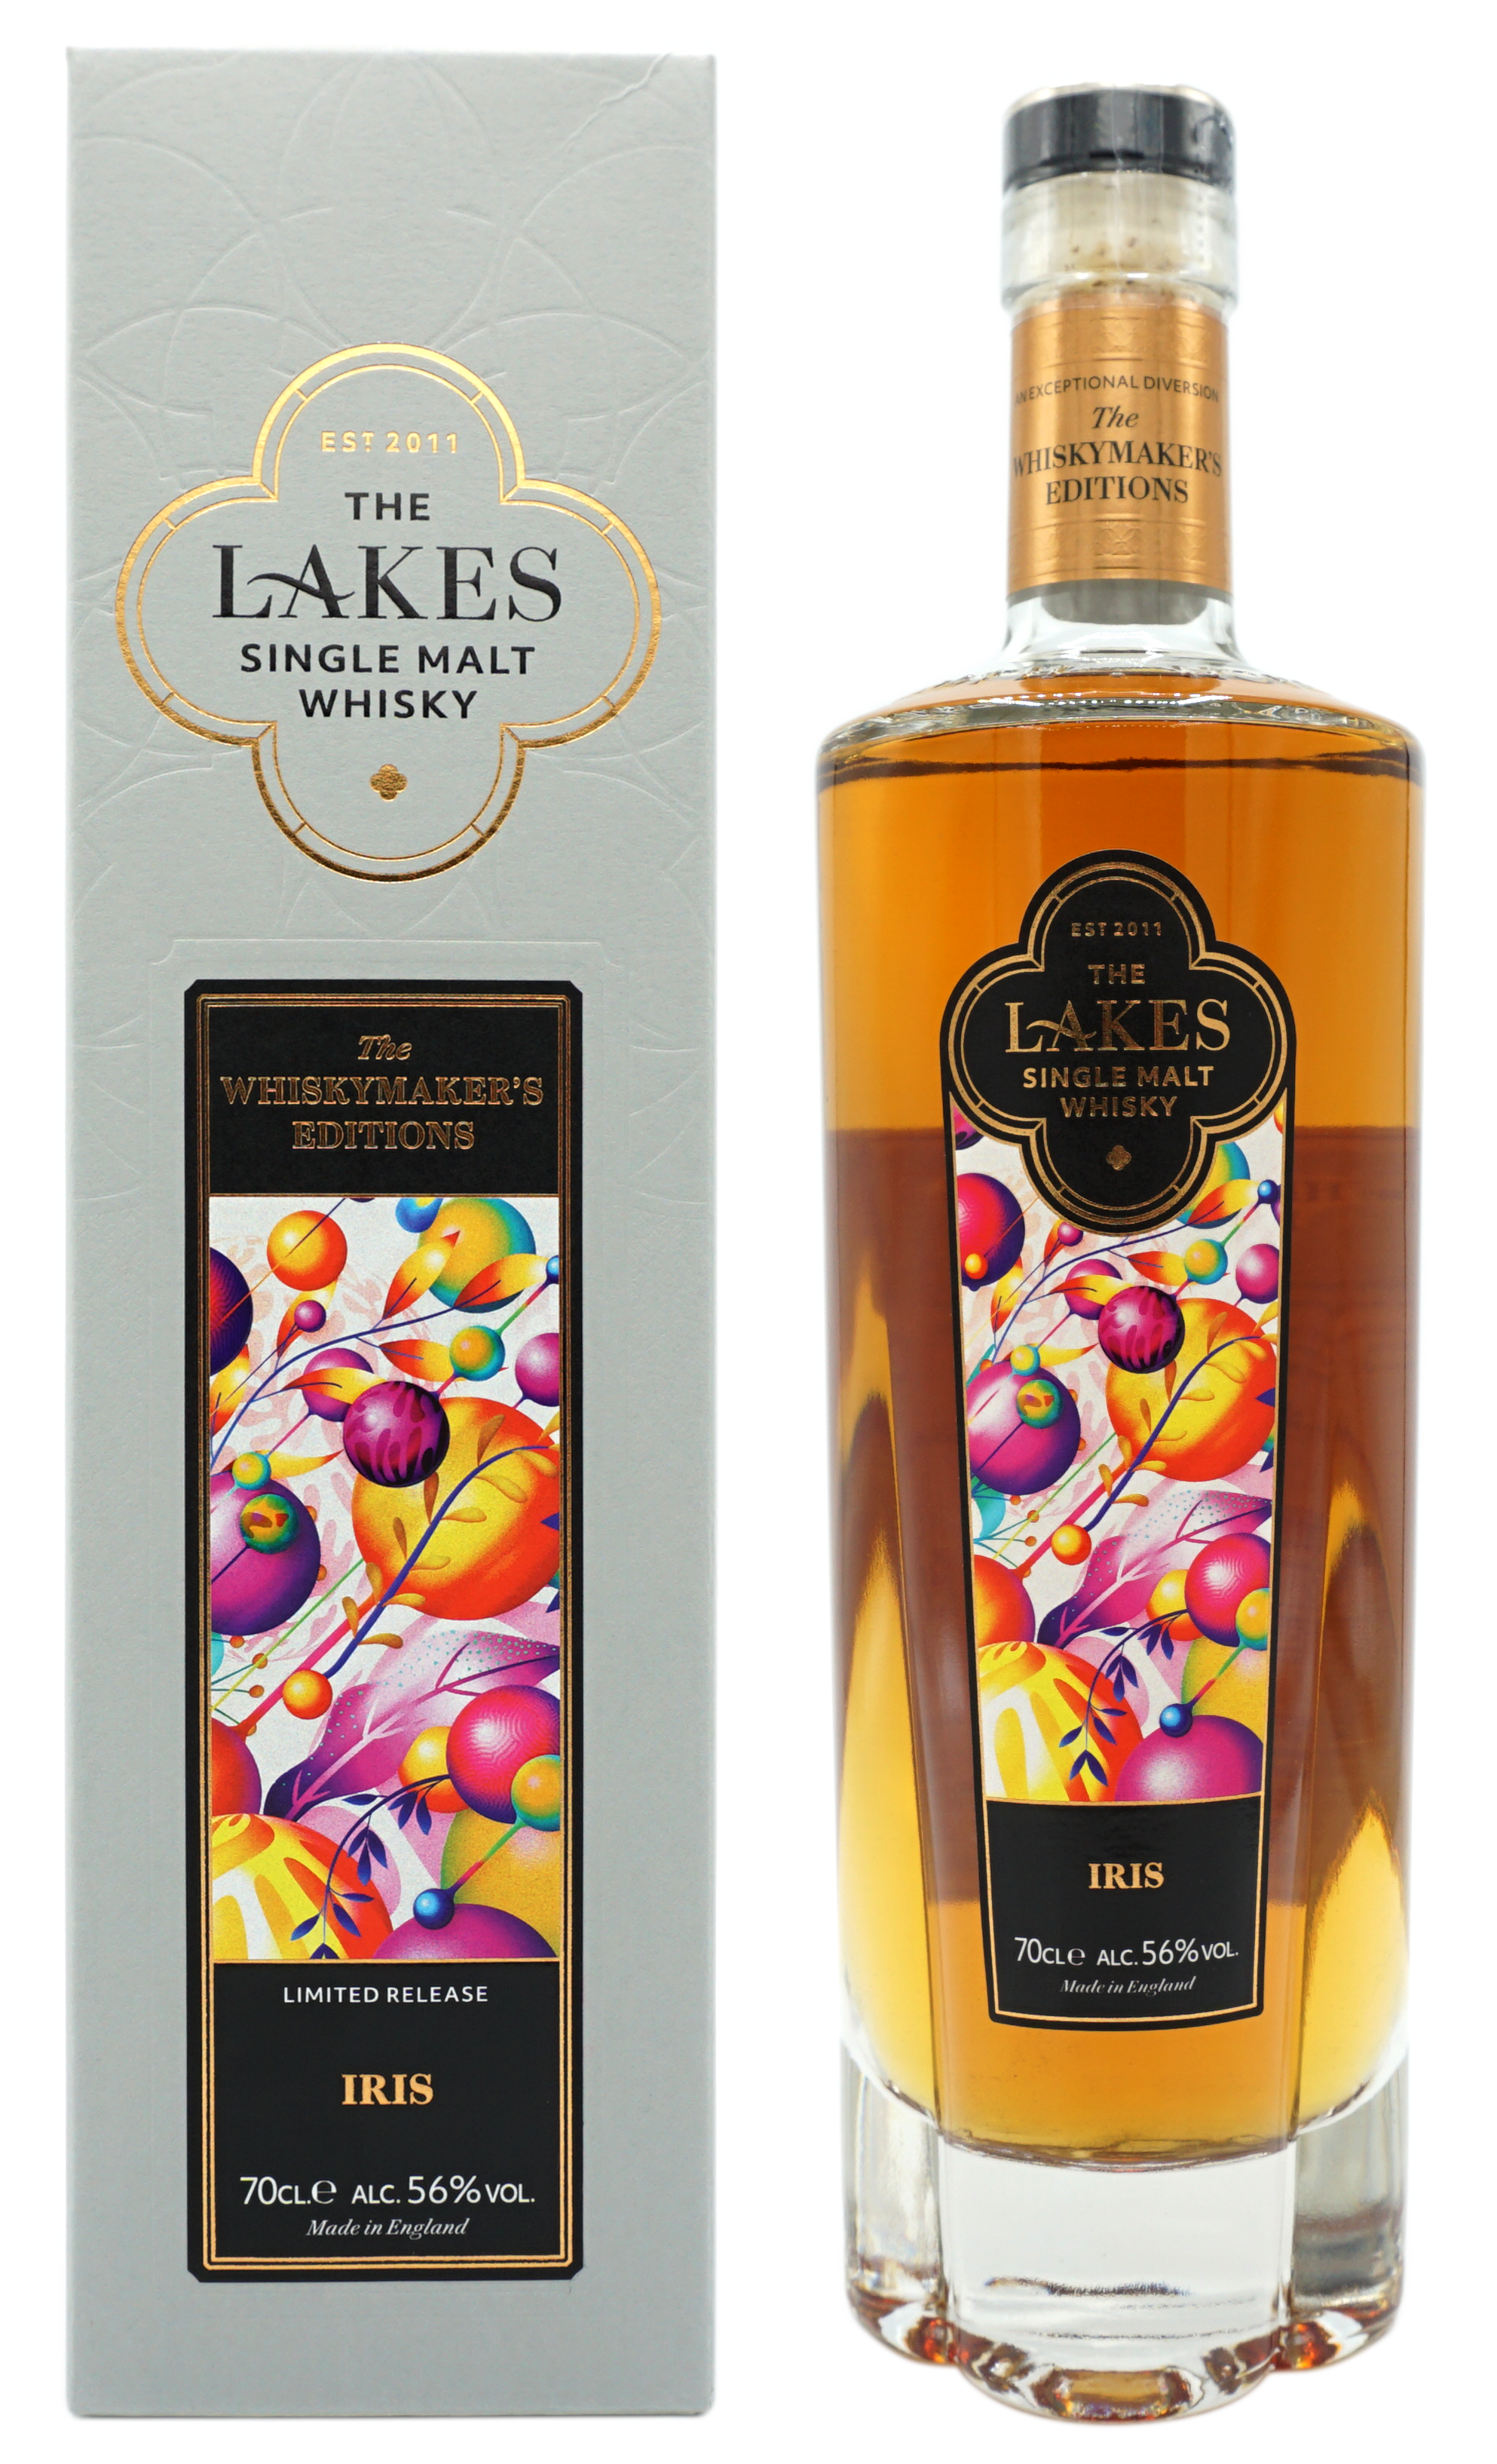 TheLakes TheWhiskymaker’sEditions Iris 56% Compleet